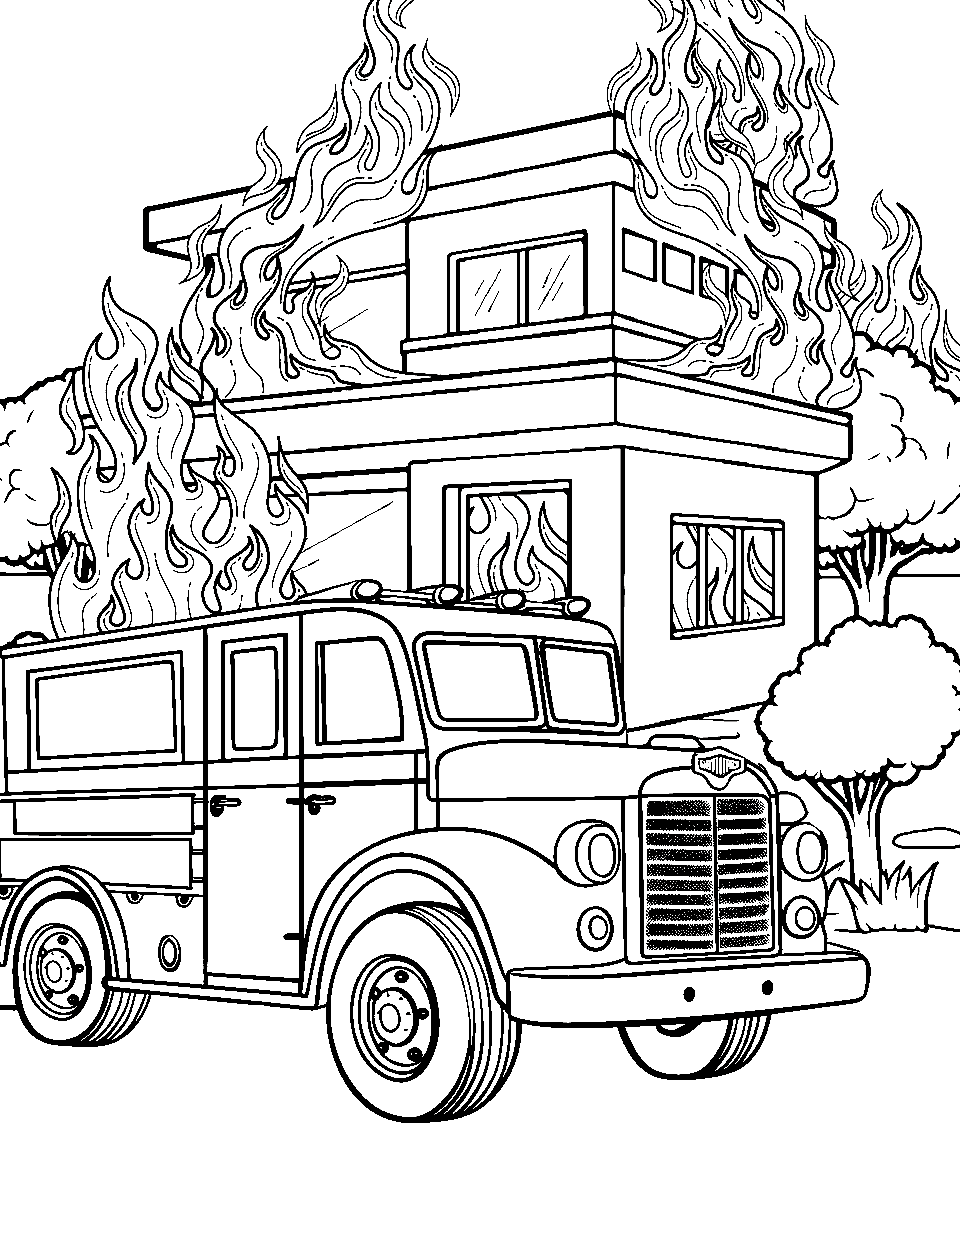 Fire Emergency Truck Coloring Page - An old fire truck parked outside a burning building.